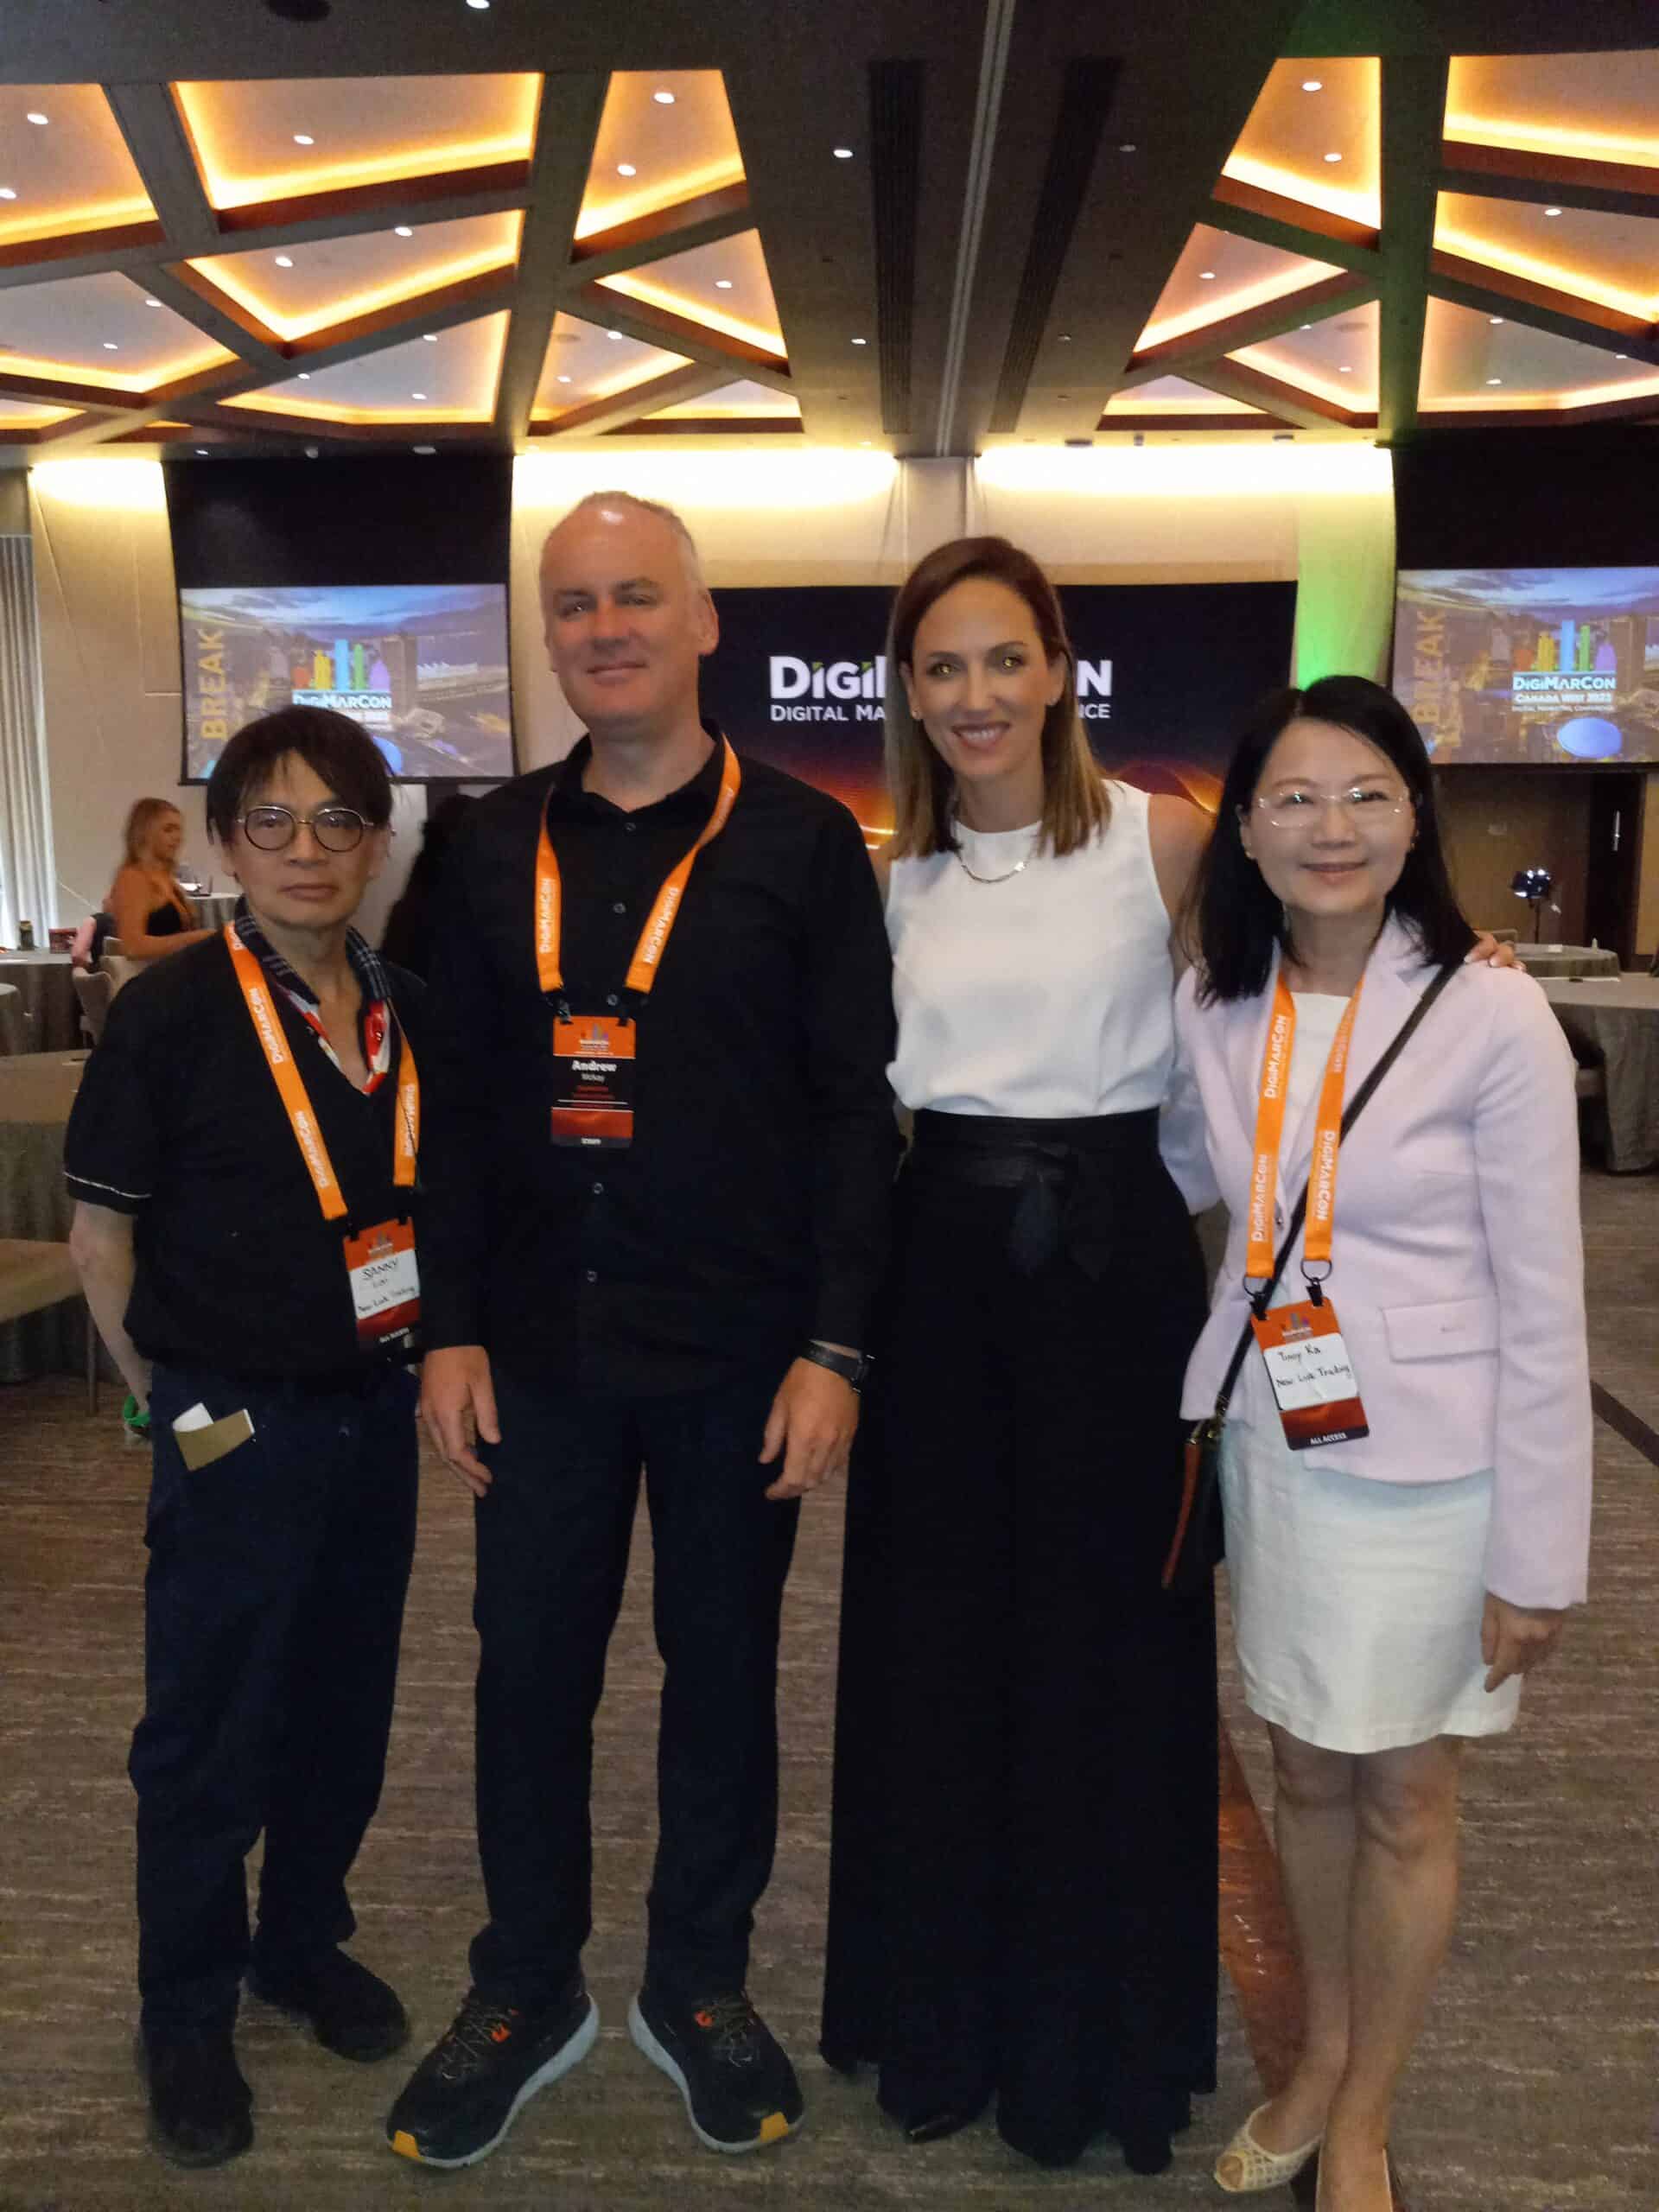 The REX Agency | REX Attends DigiMarCon Canada West 2023: A Recap of an Inspiring Day of Digital Marketing Insights - 20230515_152739